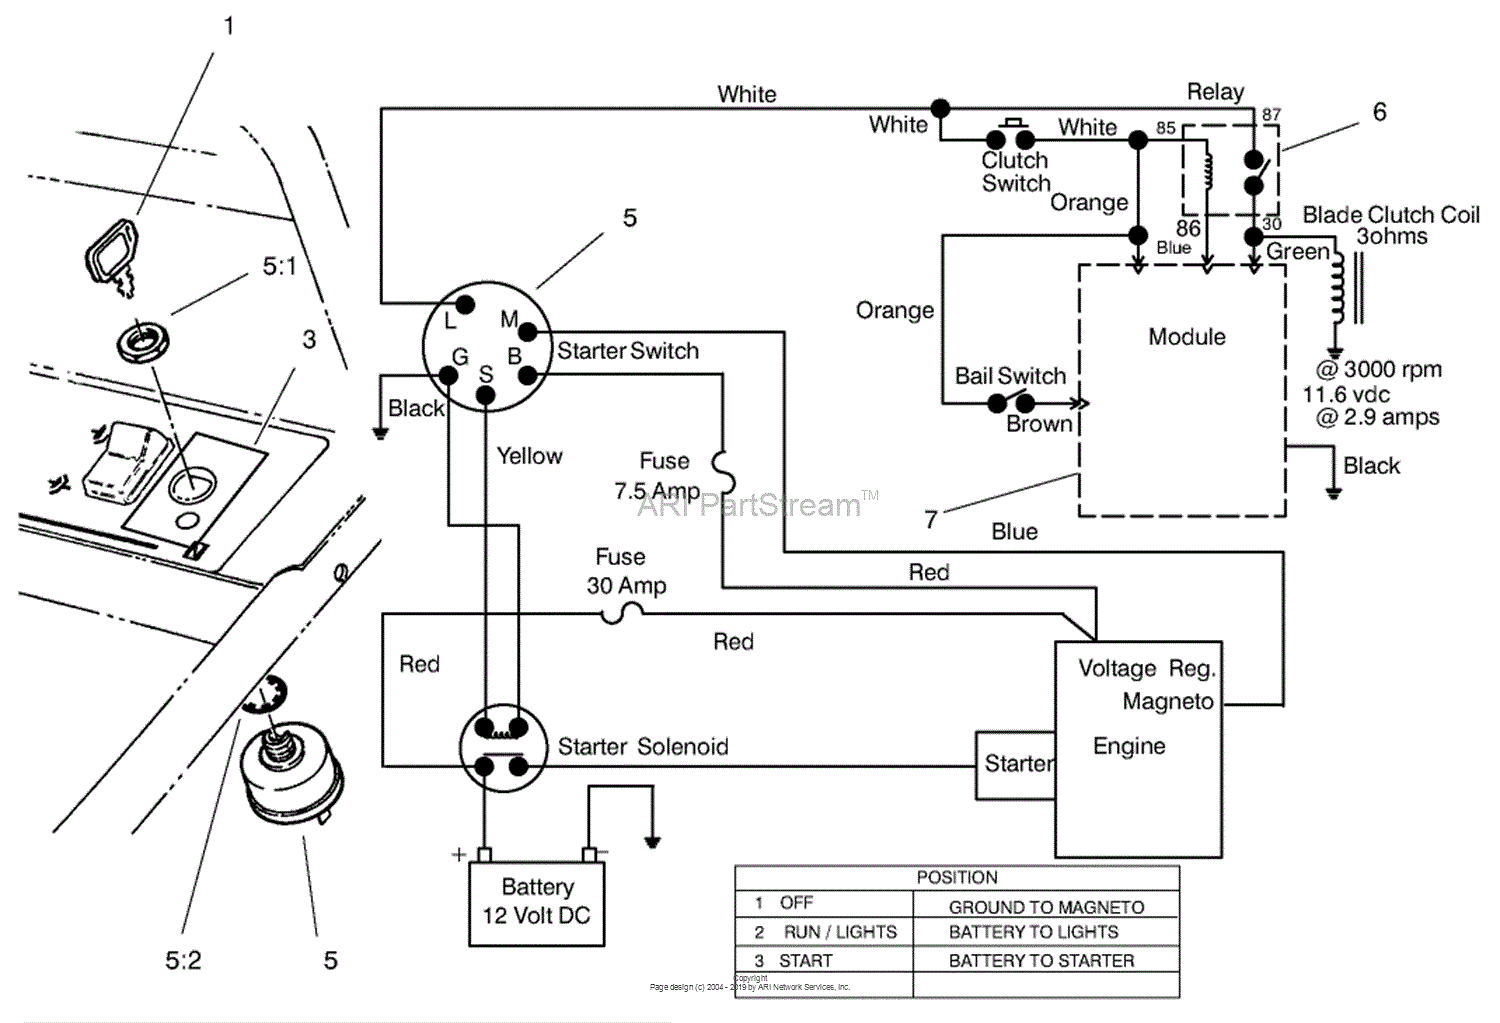 Wiring Diagram For A Switch from schematron.org